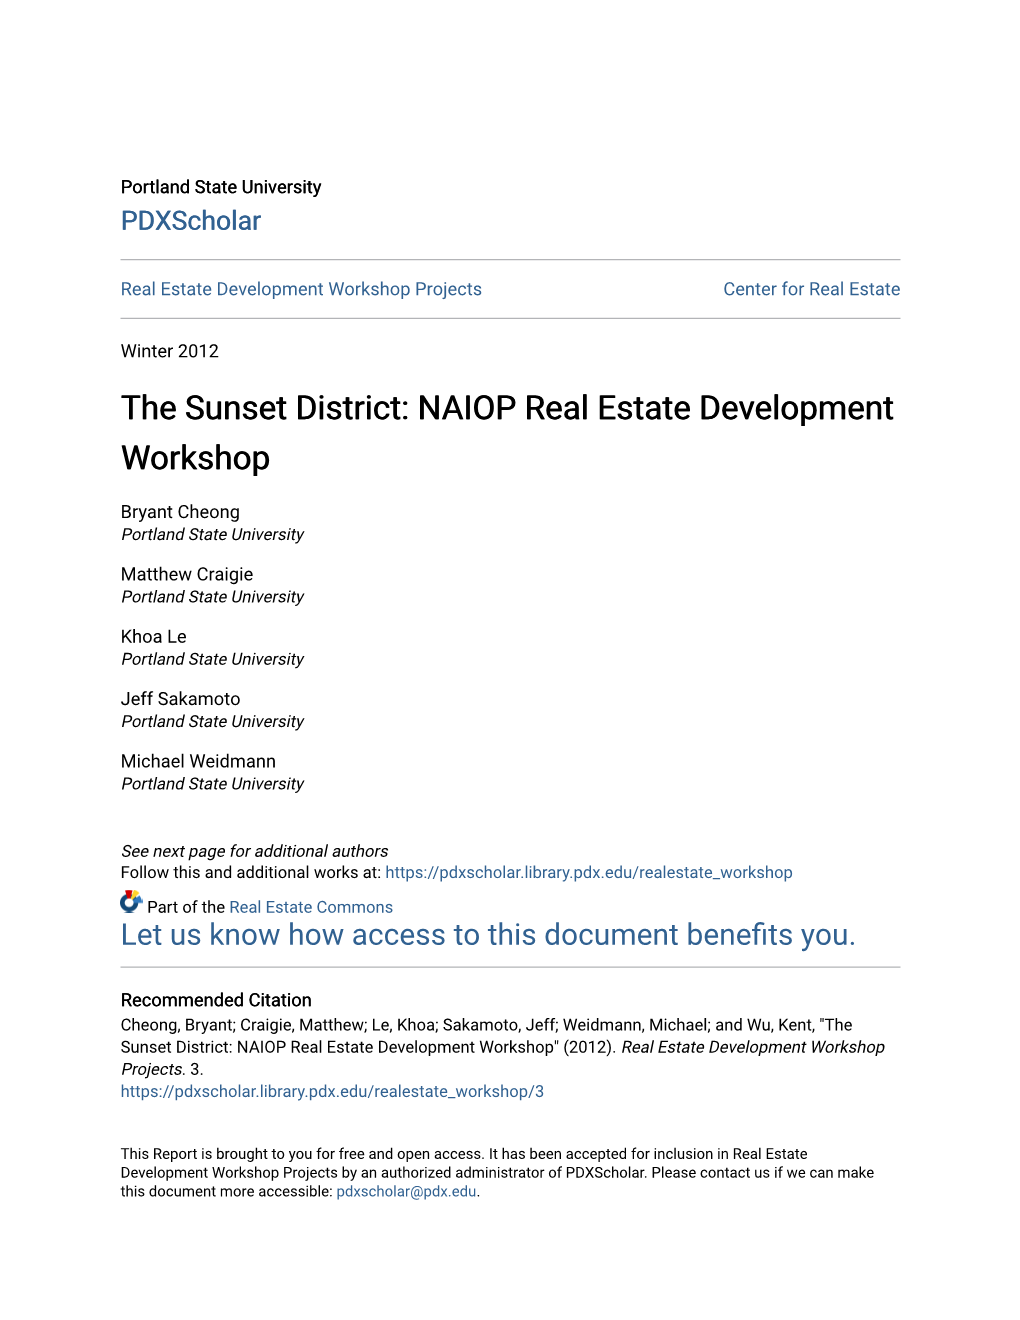 The Sunset District: NAIOP Real Estate Development Workshop